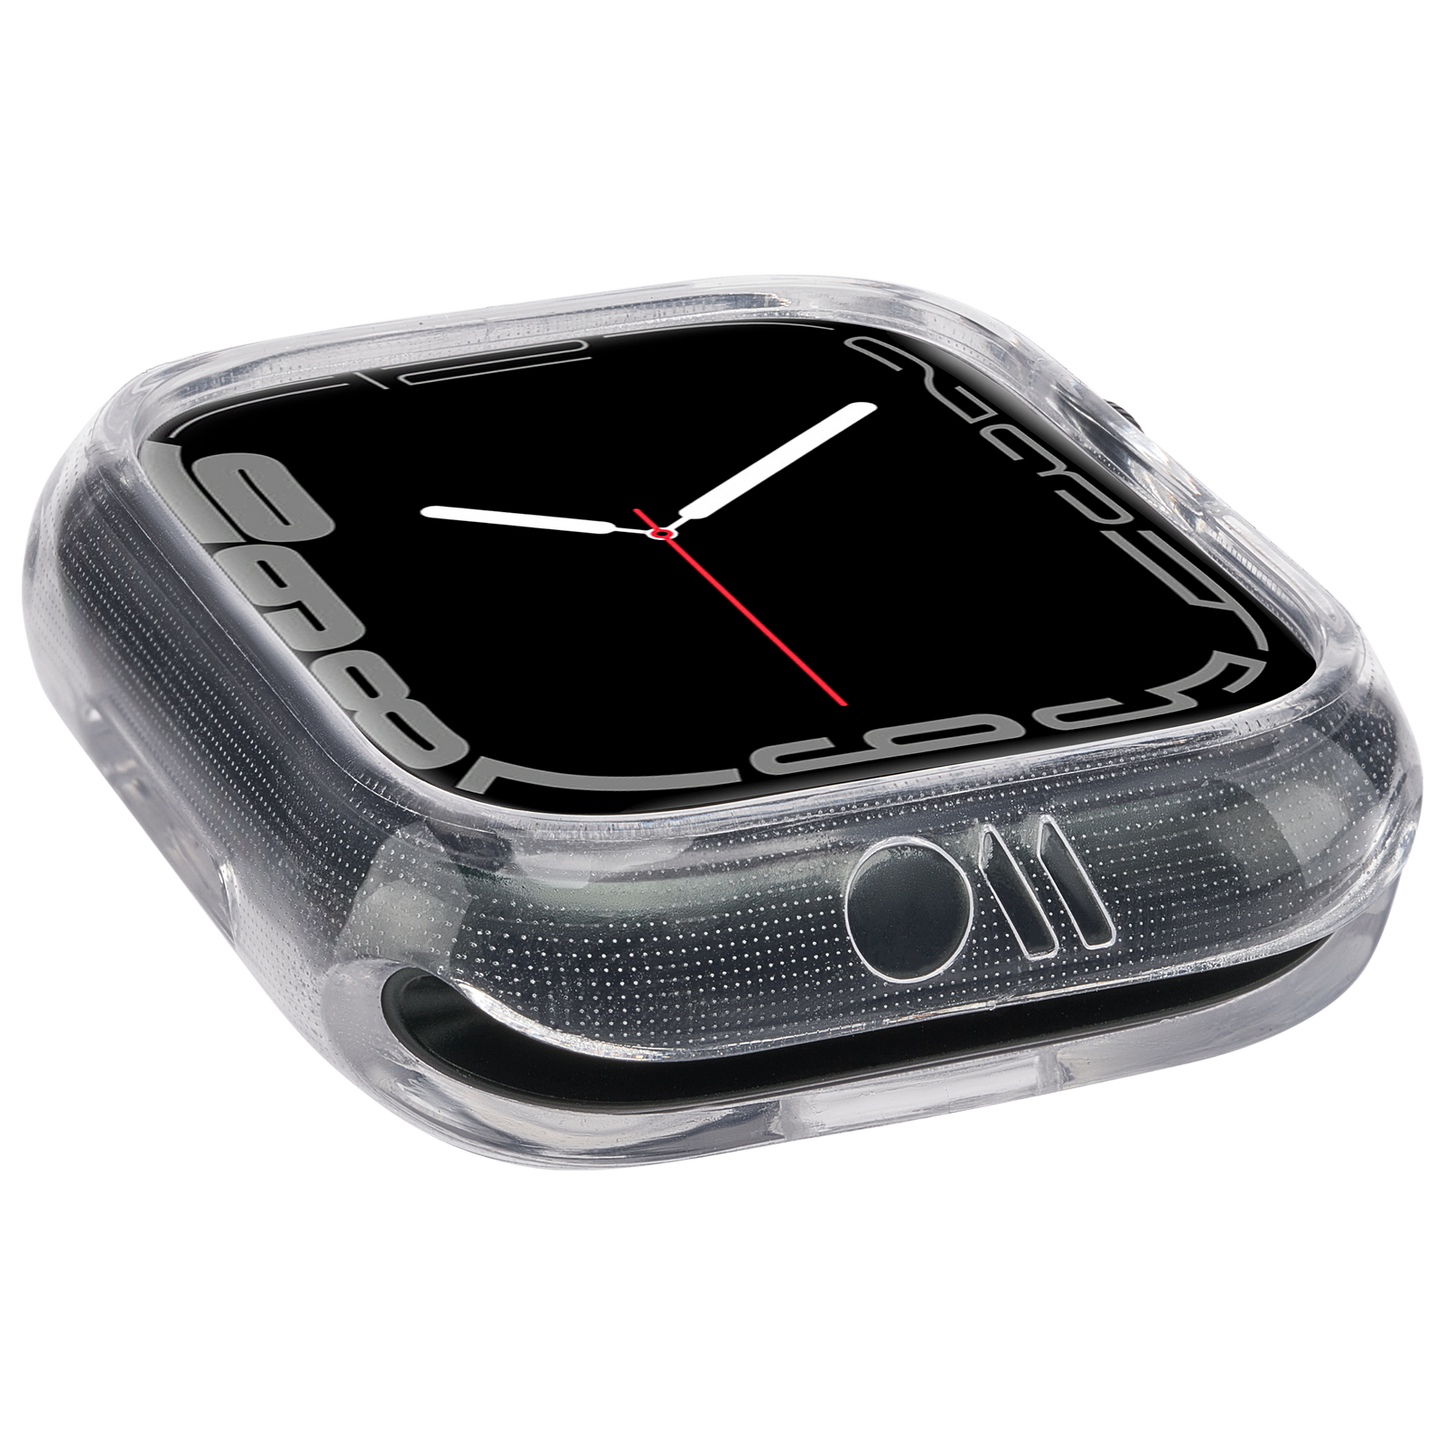 CASEMATE Tough Clear Case for Apple Watch 41mm - Clear